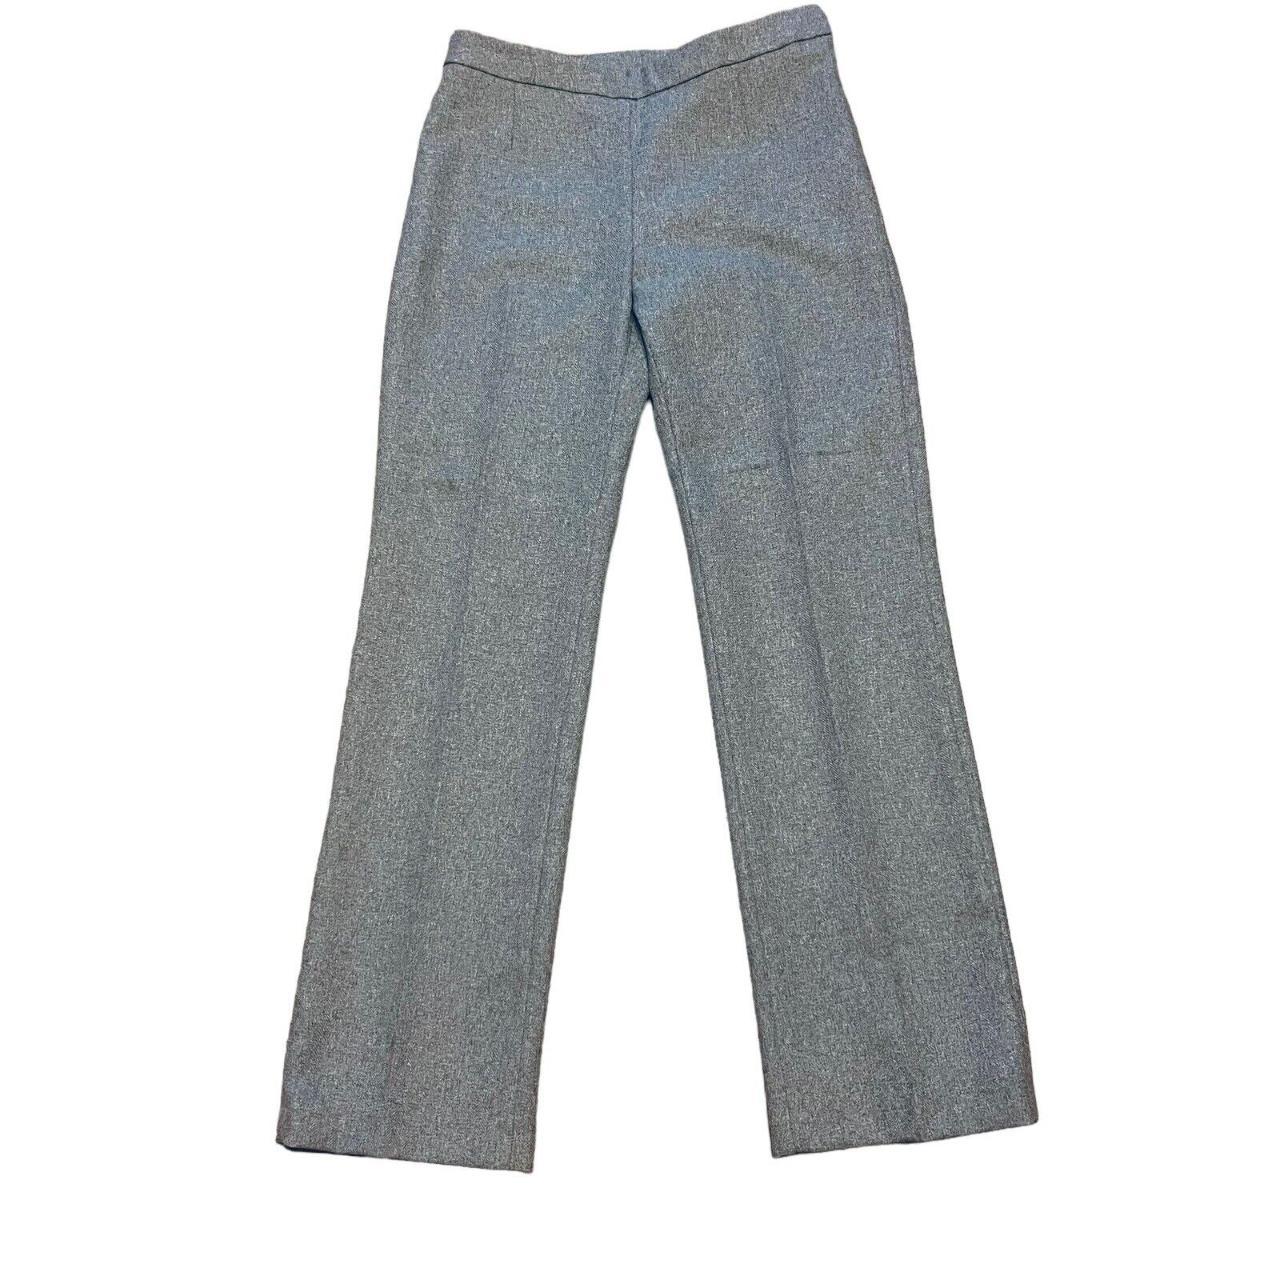 Grey Womens Trousers - Buy Grey Womens Trousers Online at Best Prices In  India | Flipkart.com